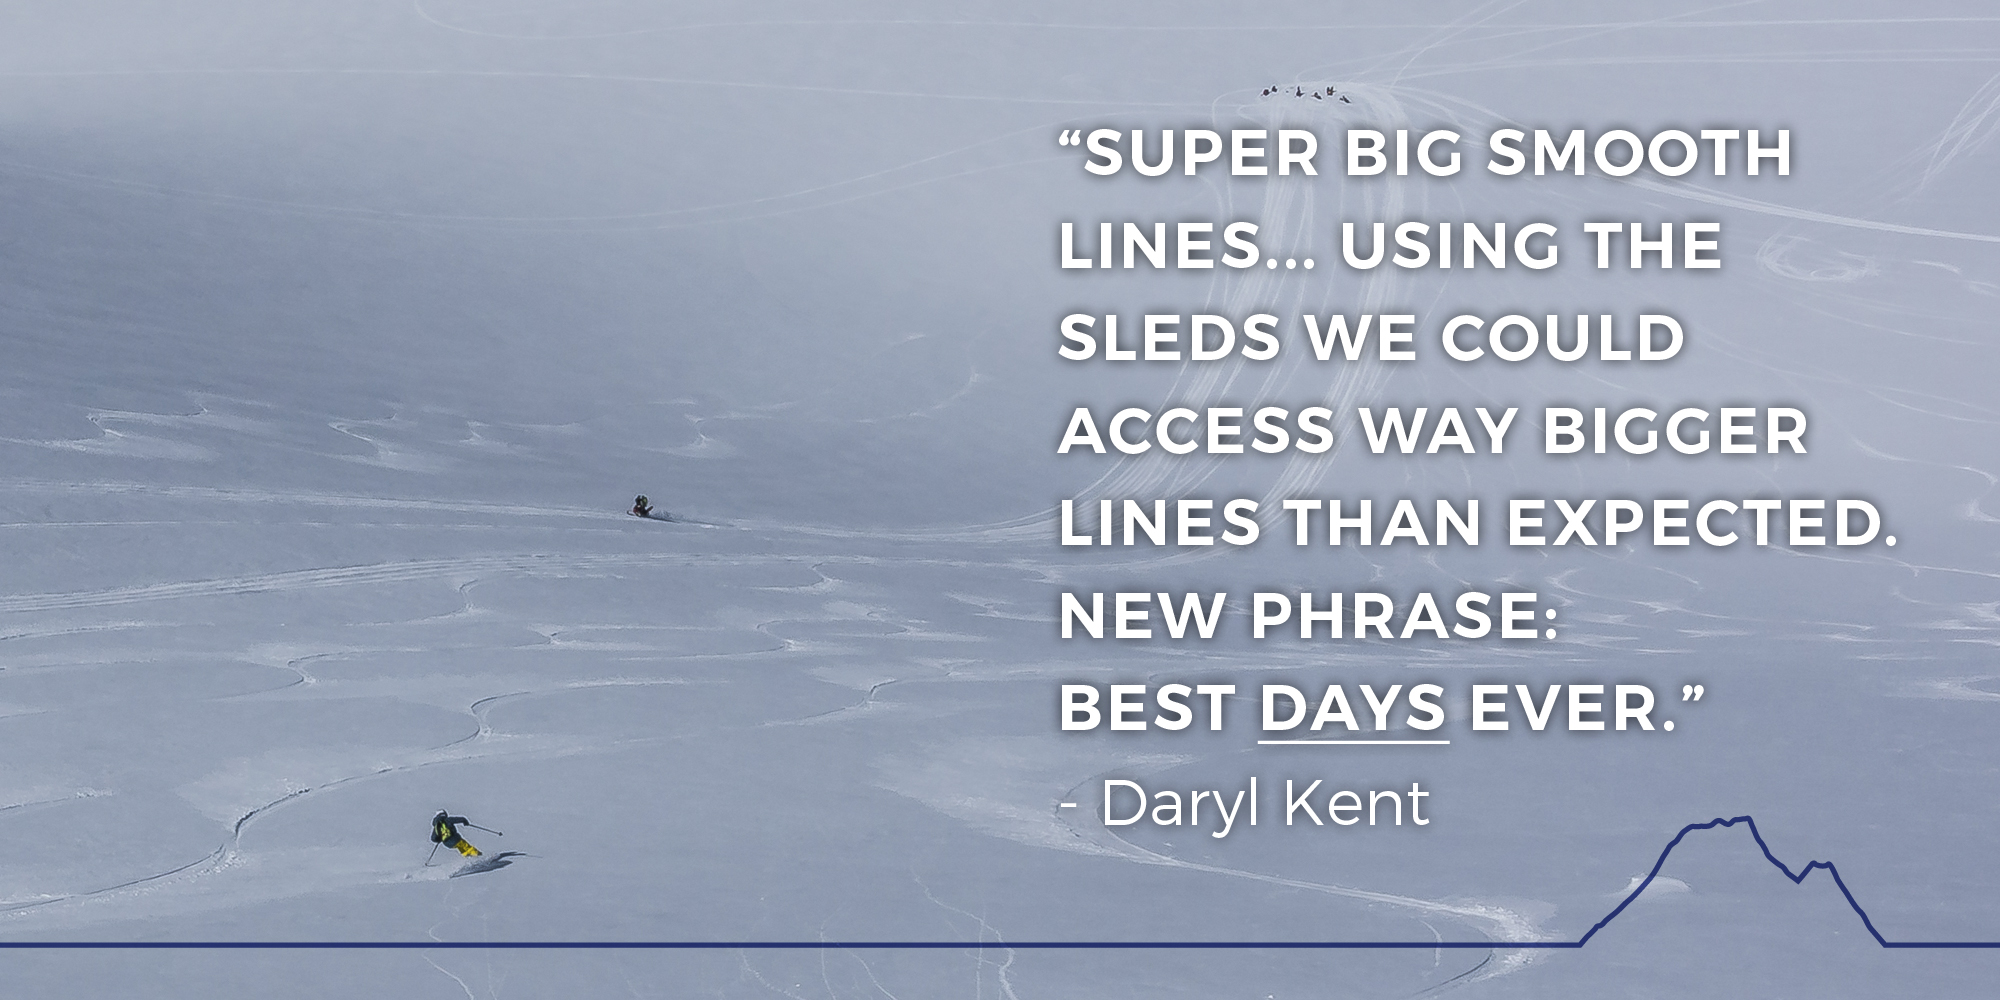 Super big smooth lines... Using the sleds we could access way bigger lines than expected. New phrase:  Best days ever.